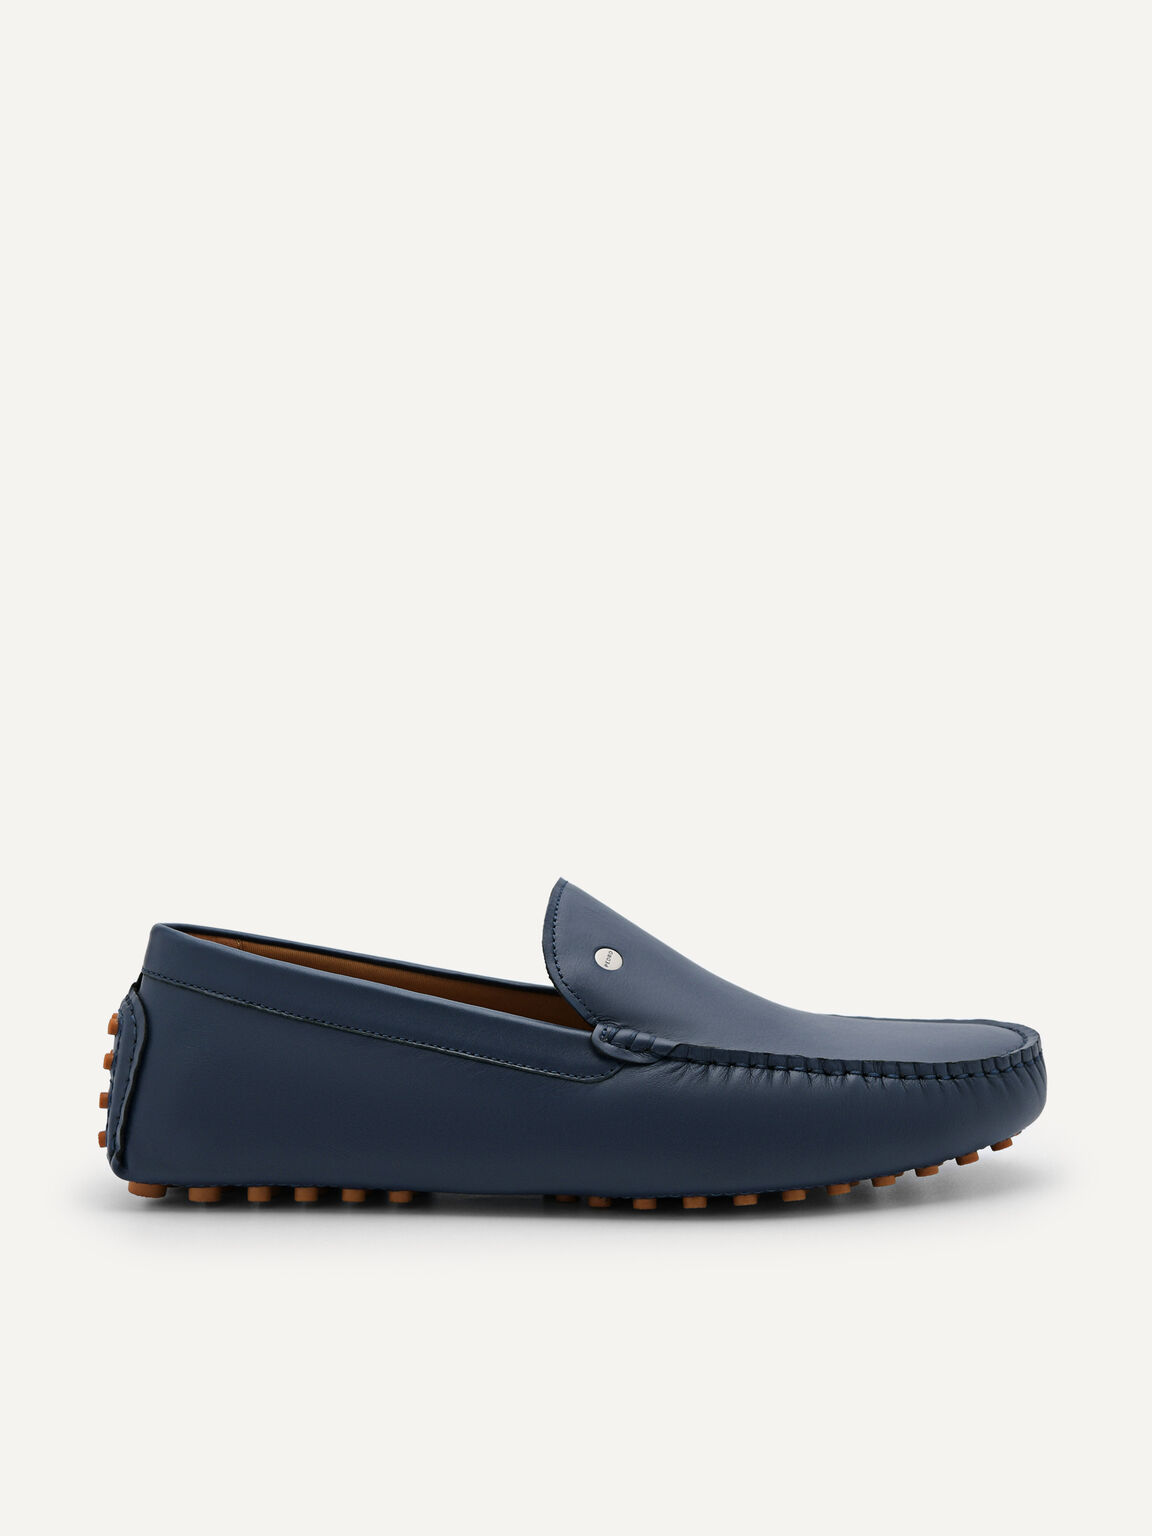 Oliver Leather Driving Shoes, Navy, hi-res